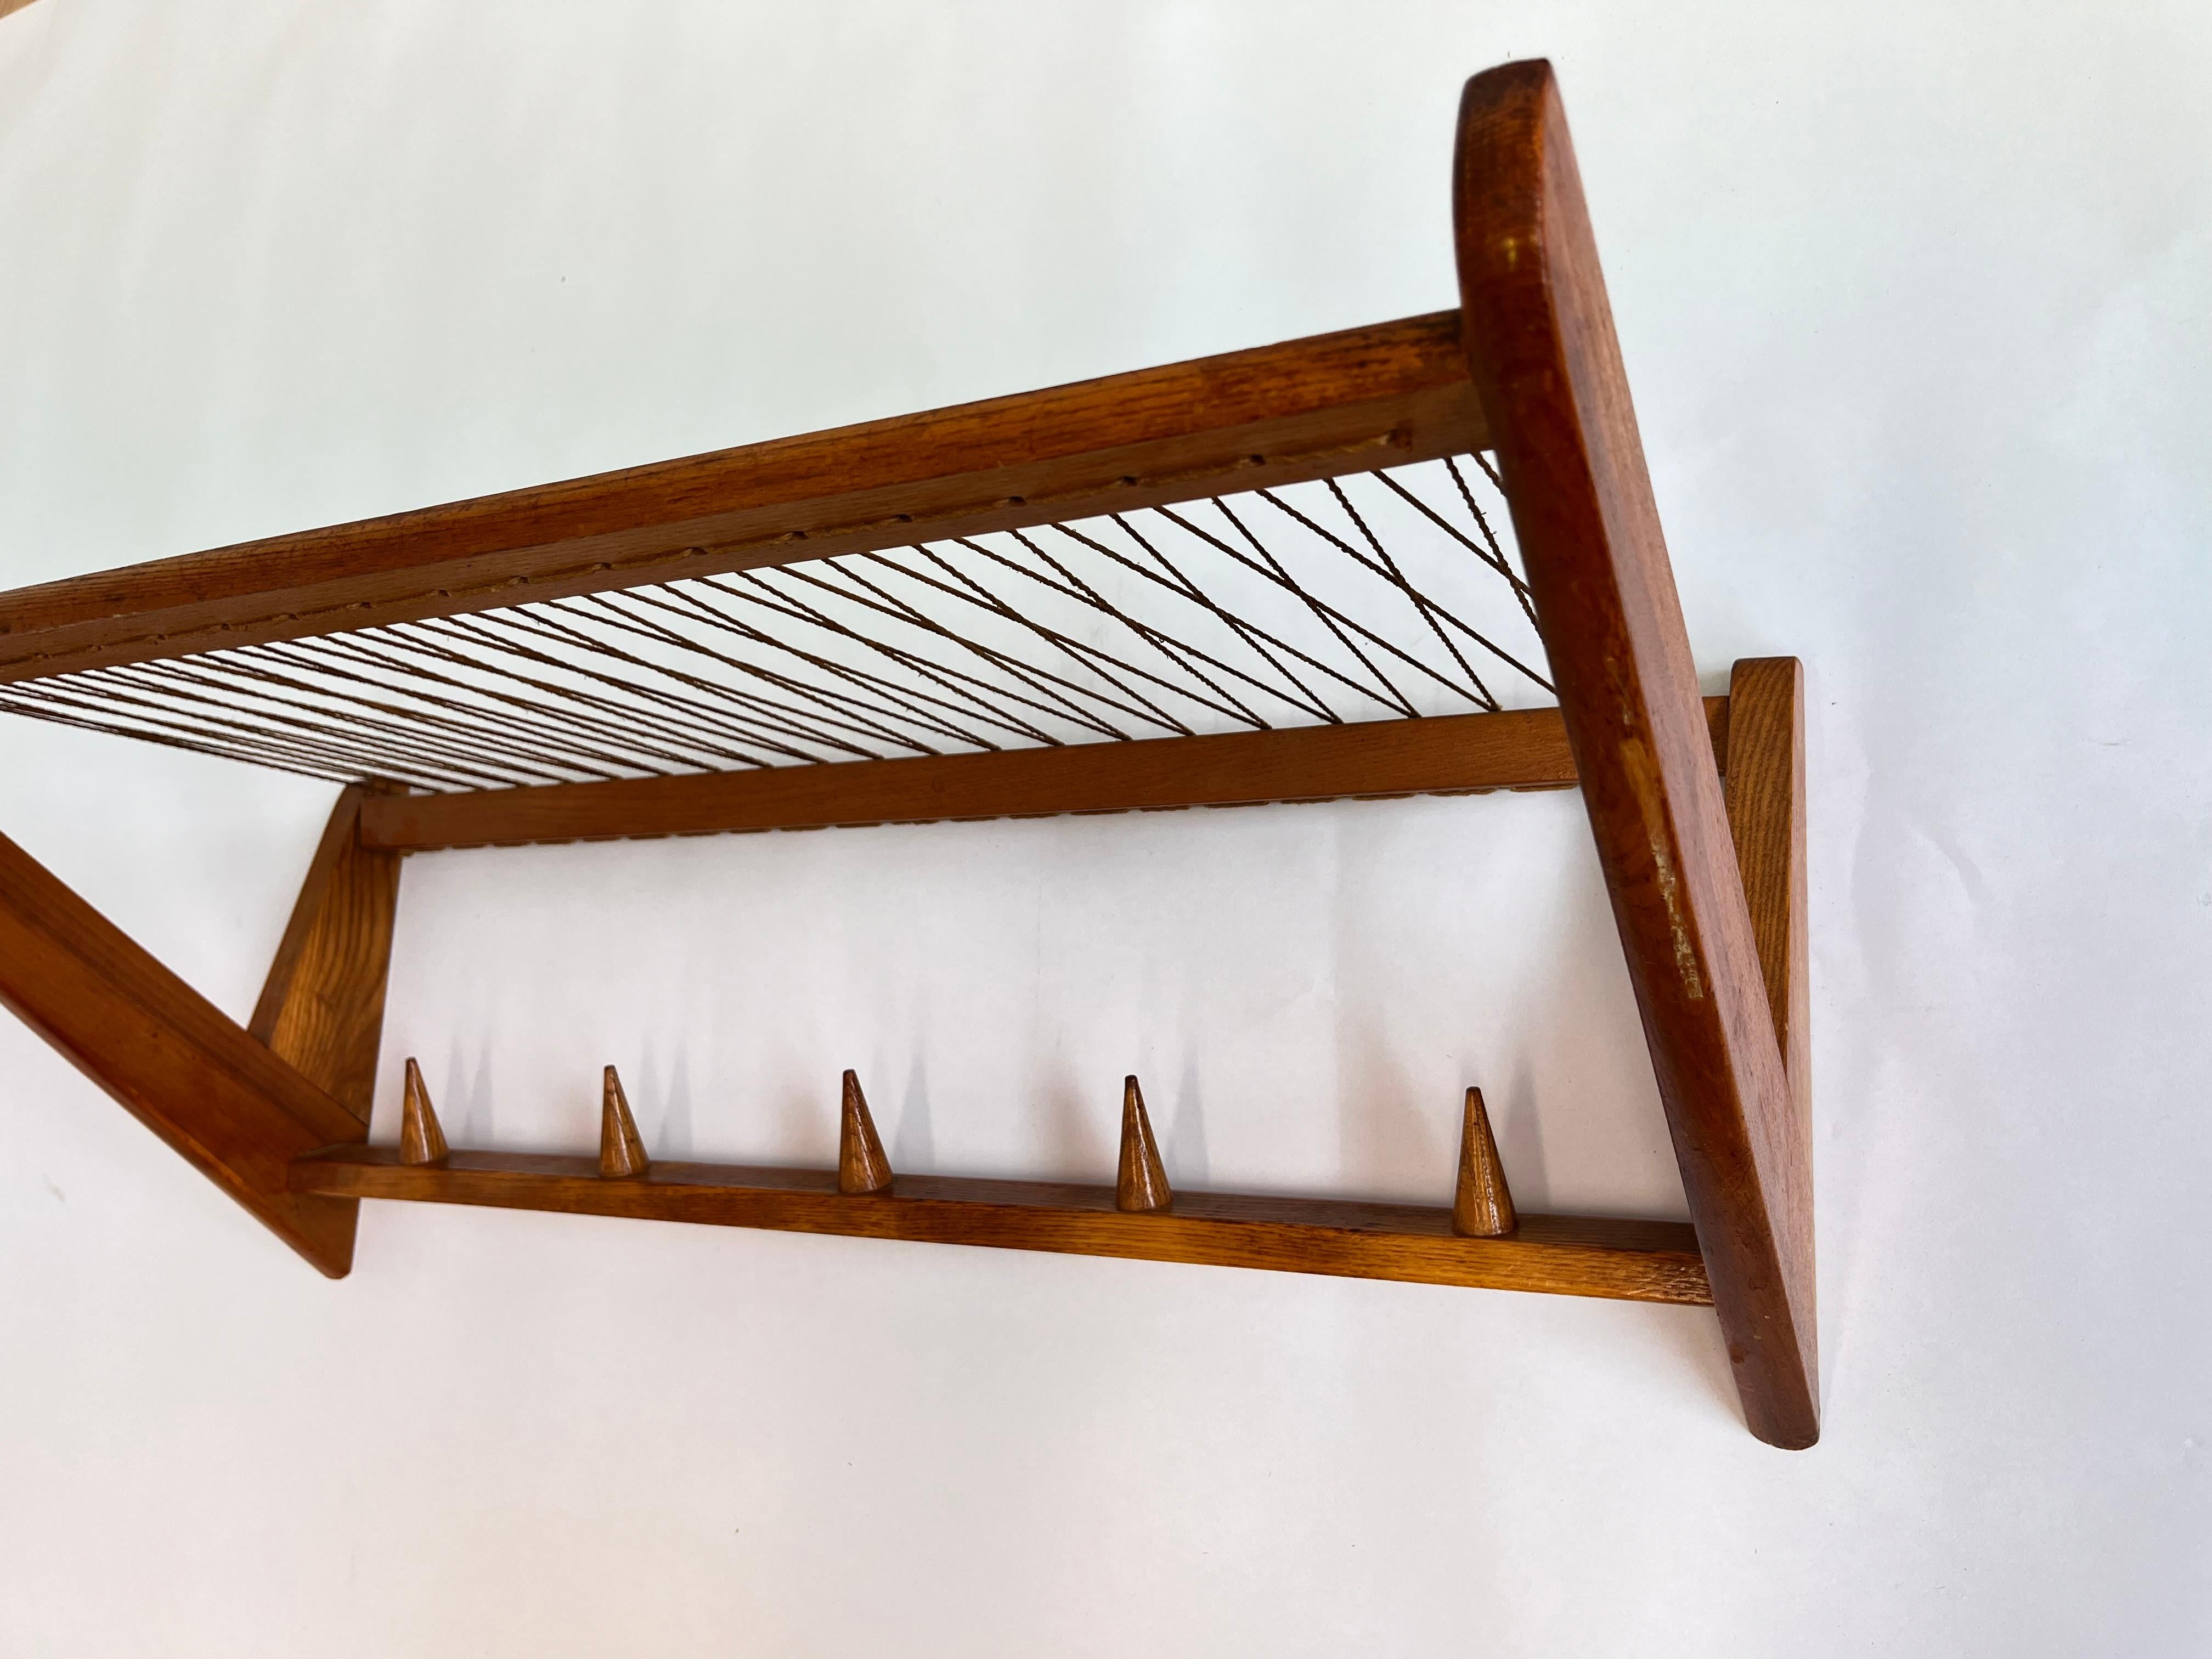 Midcentury wooden Design Wall Coat Rack by ÚLUV - Czechoslovakia, 1960s For Sale 1